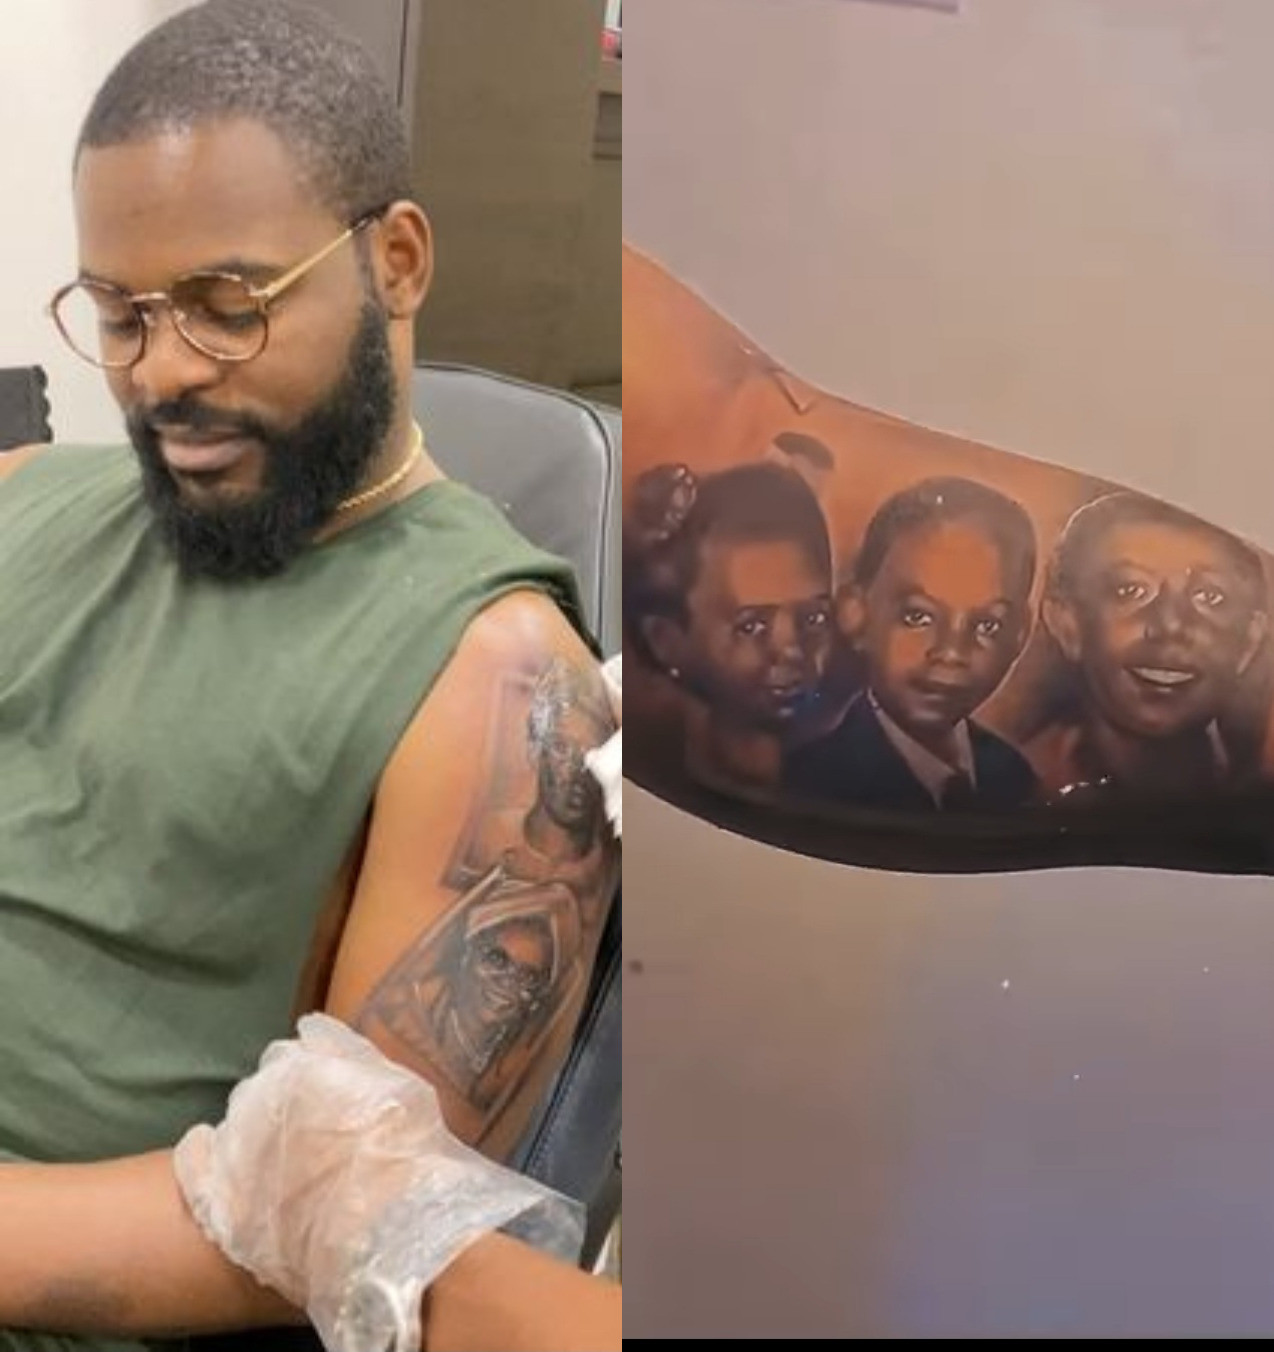 Singer, Falz gets tattoos of his family on his arm (videos)